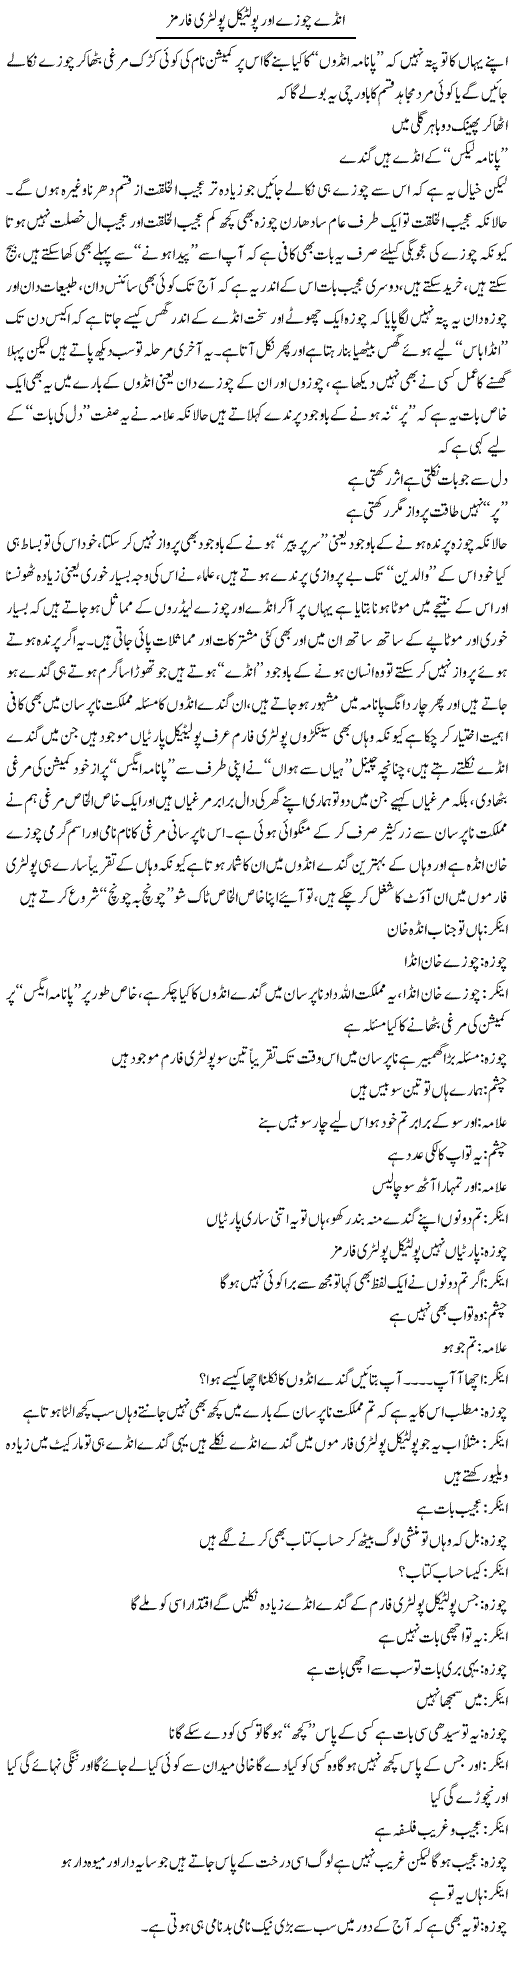 Anday Choozay Aor Poltical Poultry Forms | Saad Ullah Jan Barq | Daily Urdu Columns